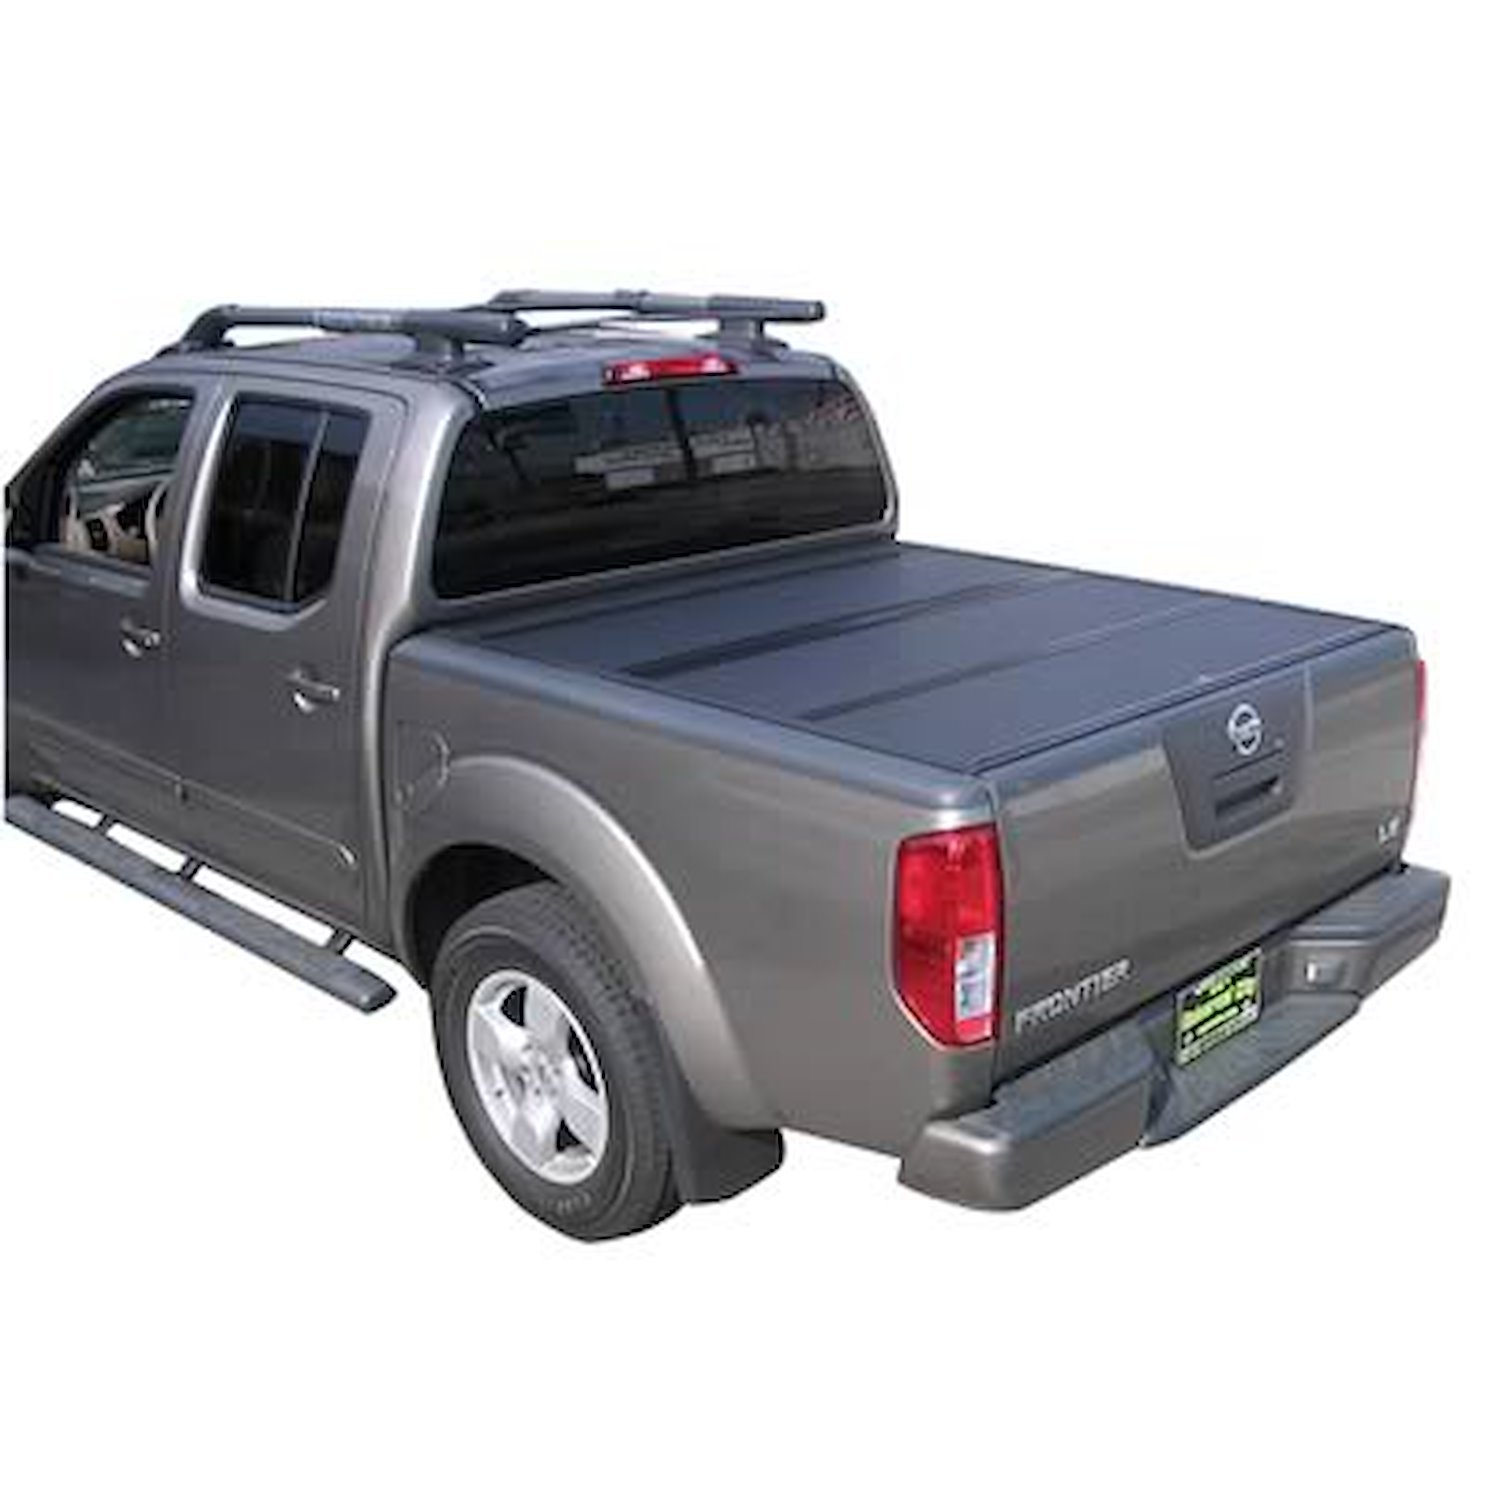 226501 BAKFlip G2 for 00-04 Nissan Frontier 6.5 ft. Bed, Hard Folding Cover Style [Black Finish]